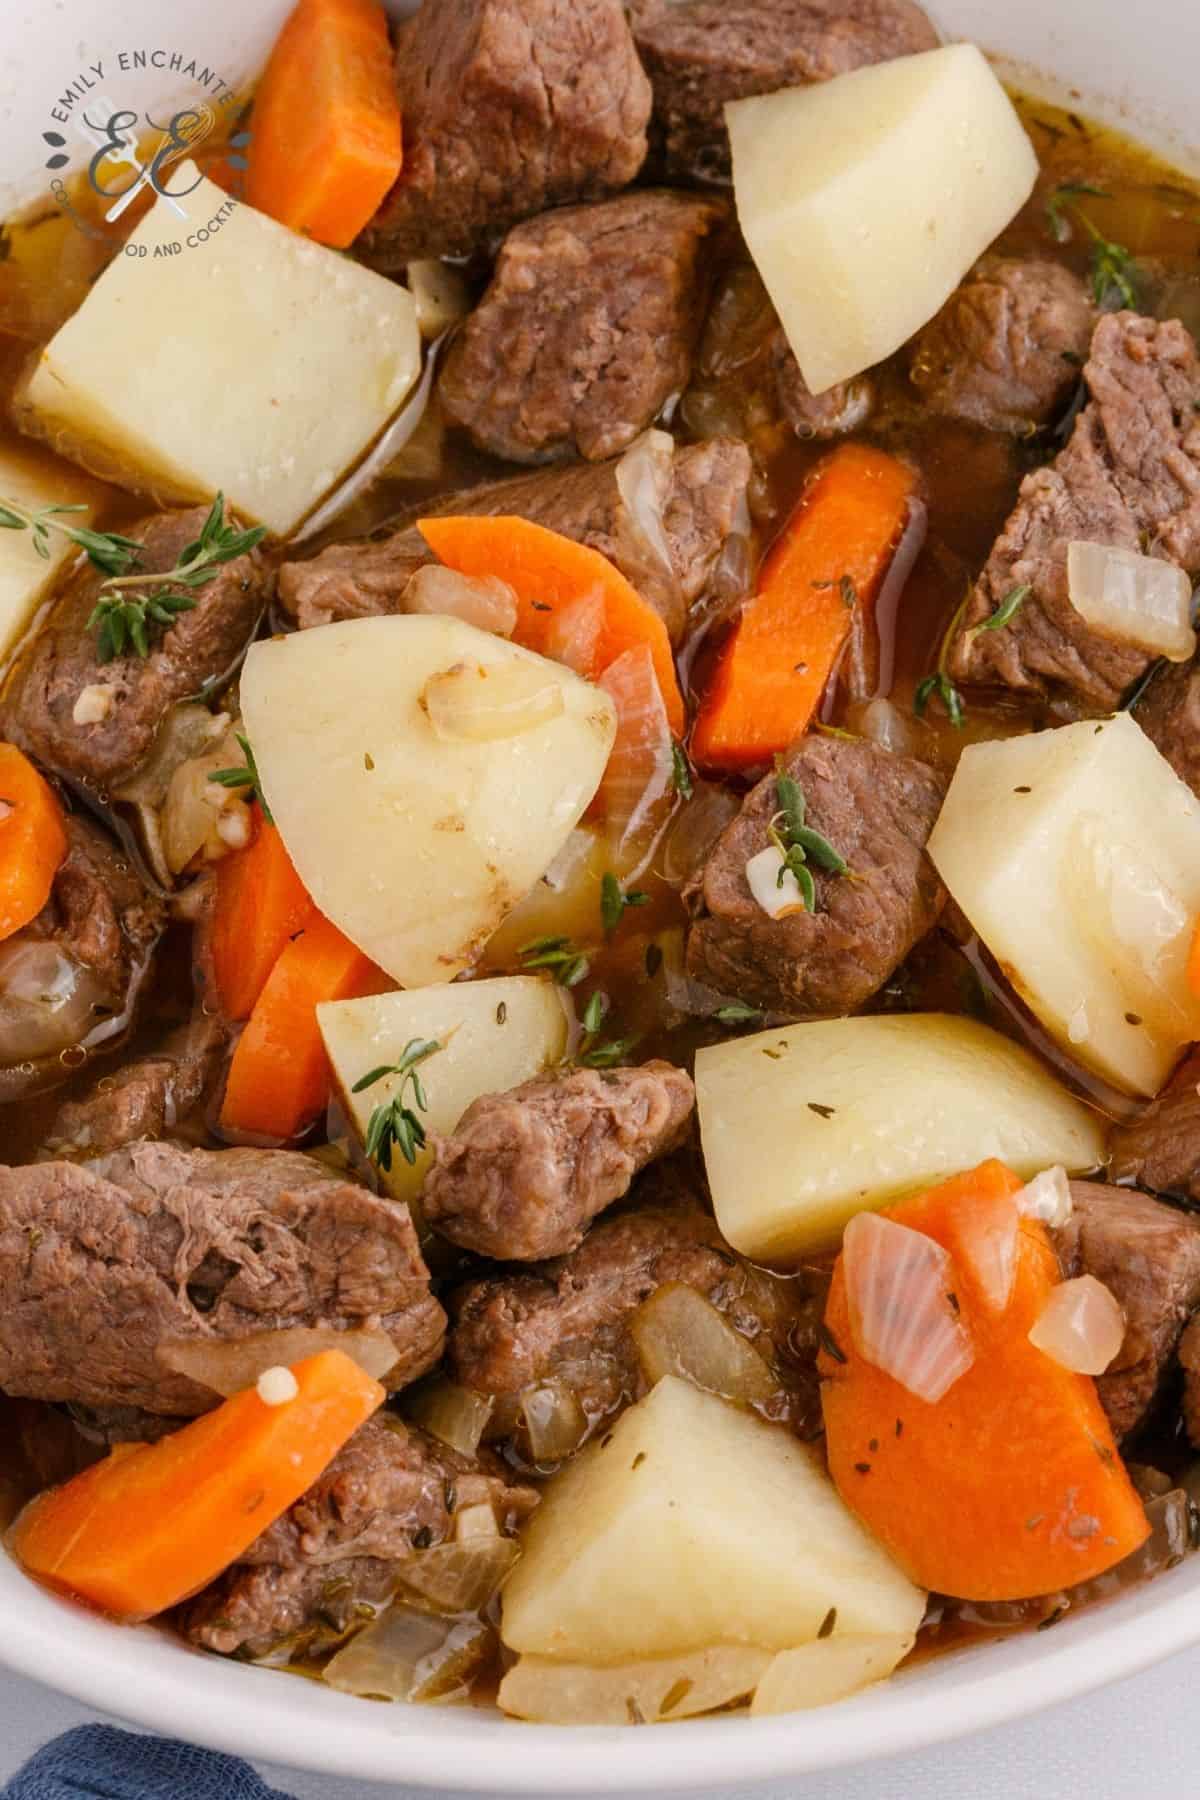 Bowl of beef stew with potatoes, onion and carrots